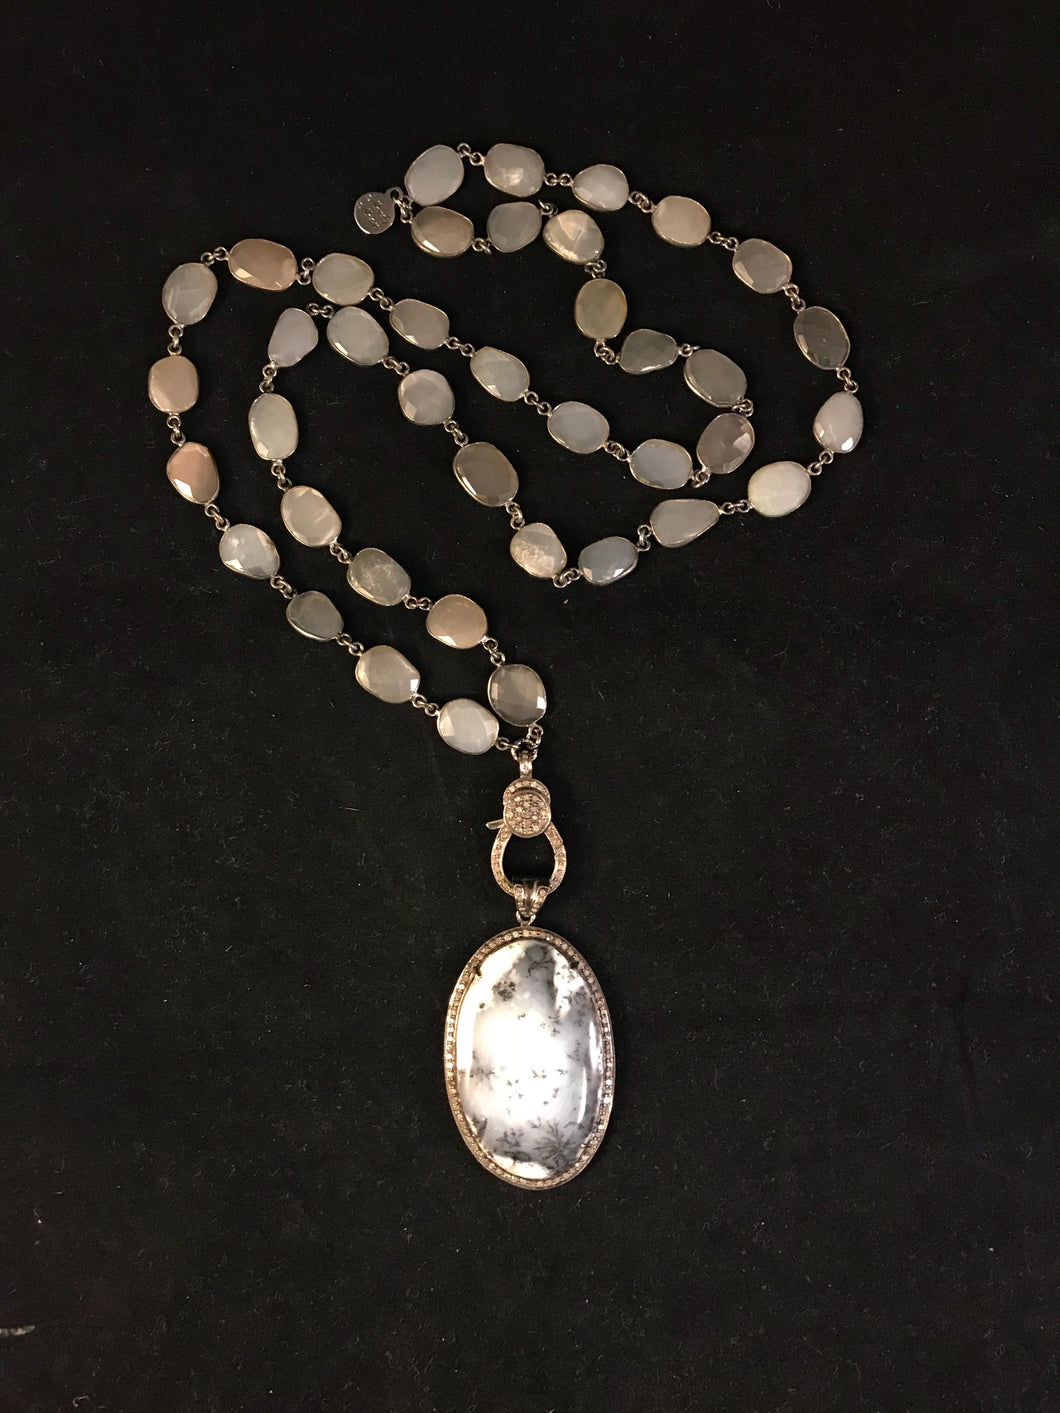 Dendritic opal and diamond pendant necklace